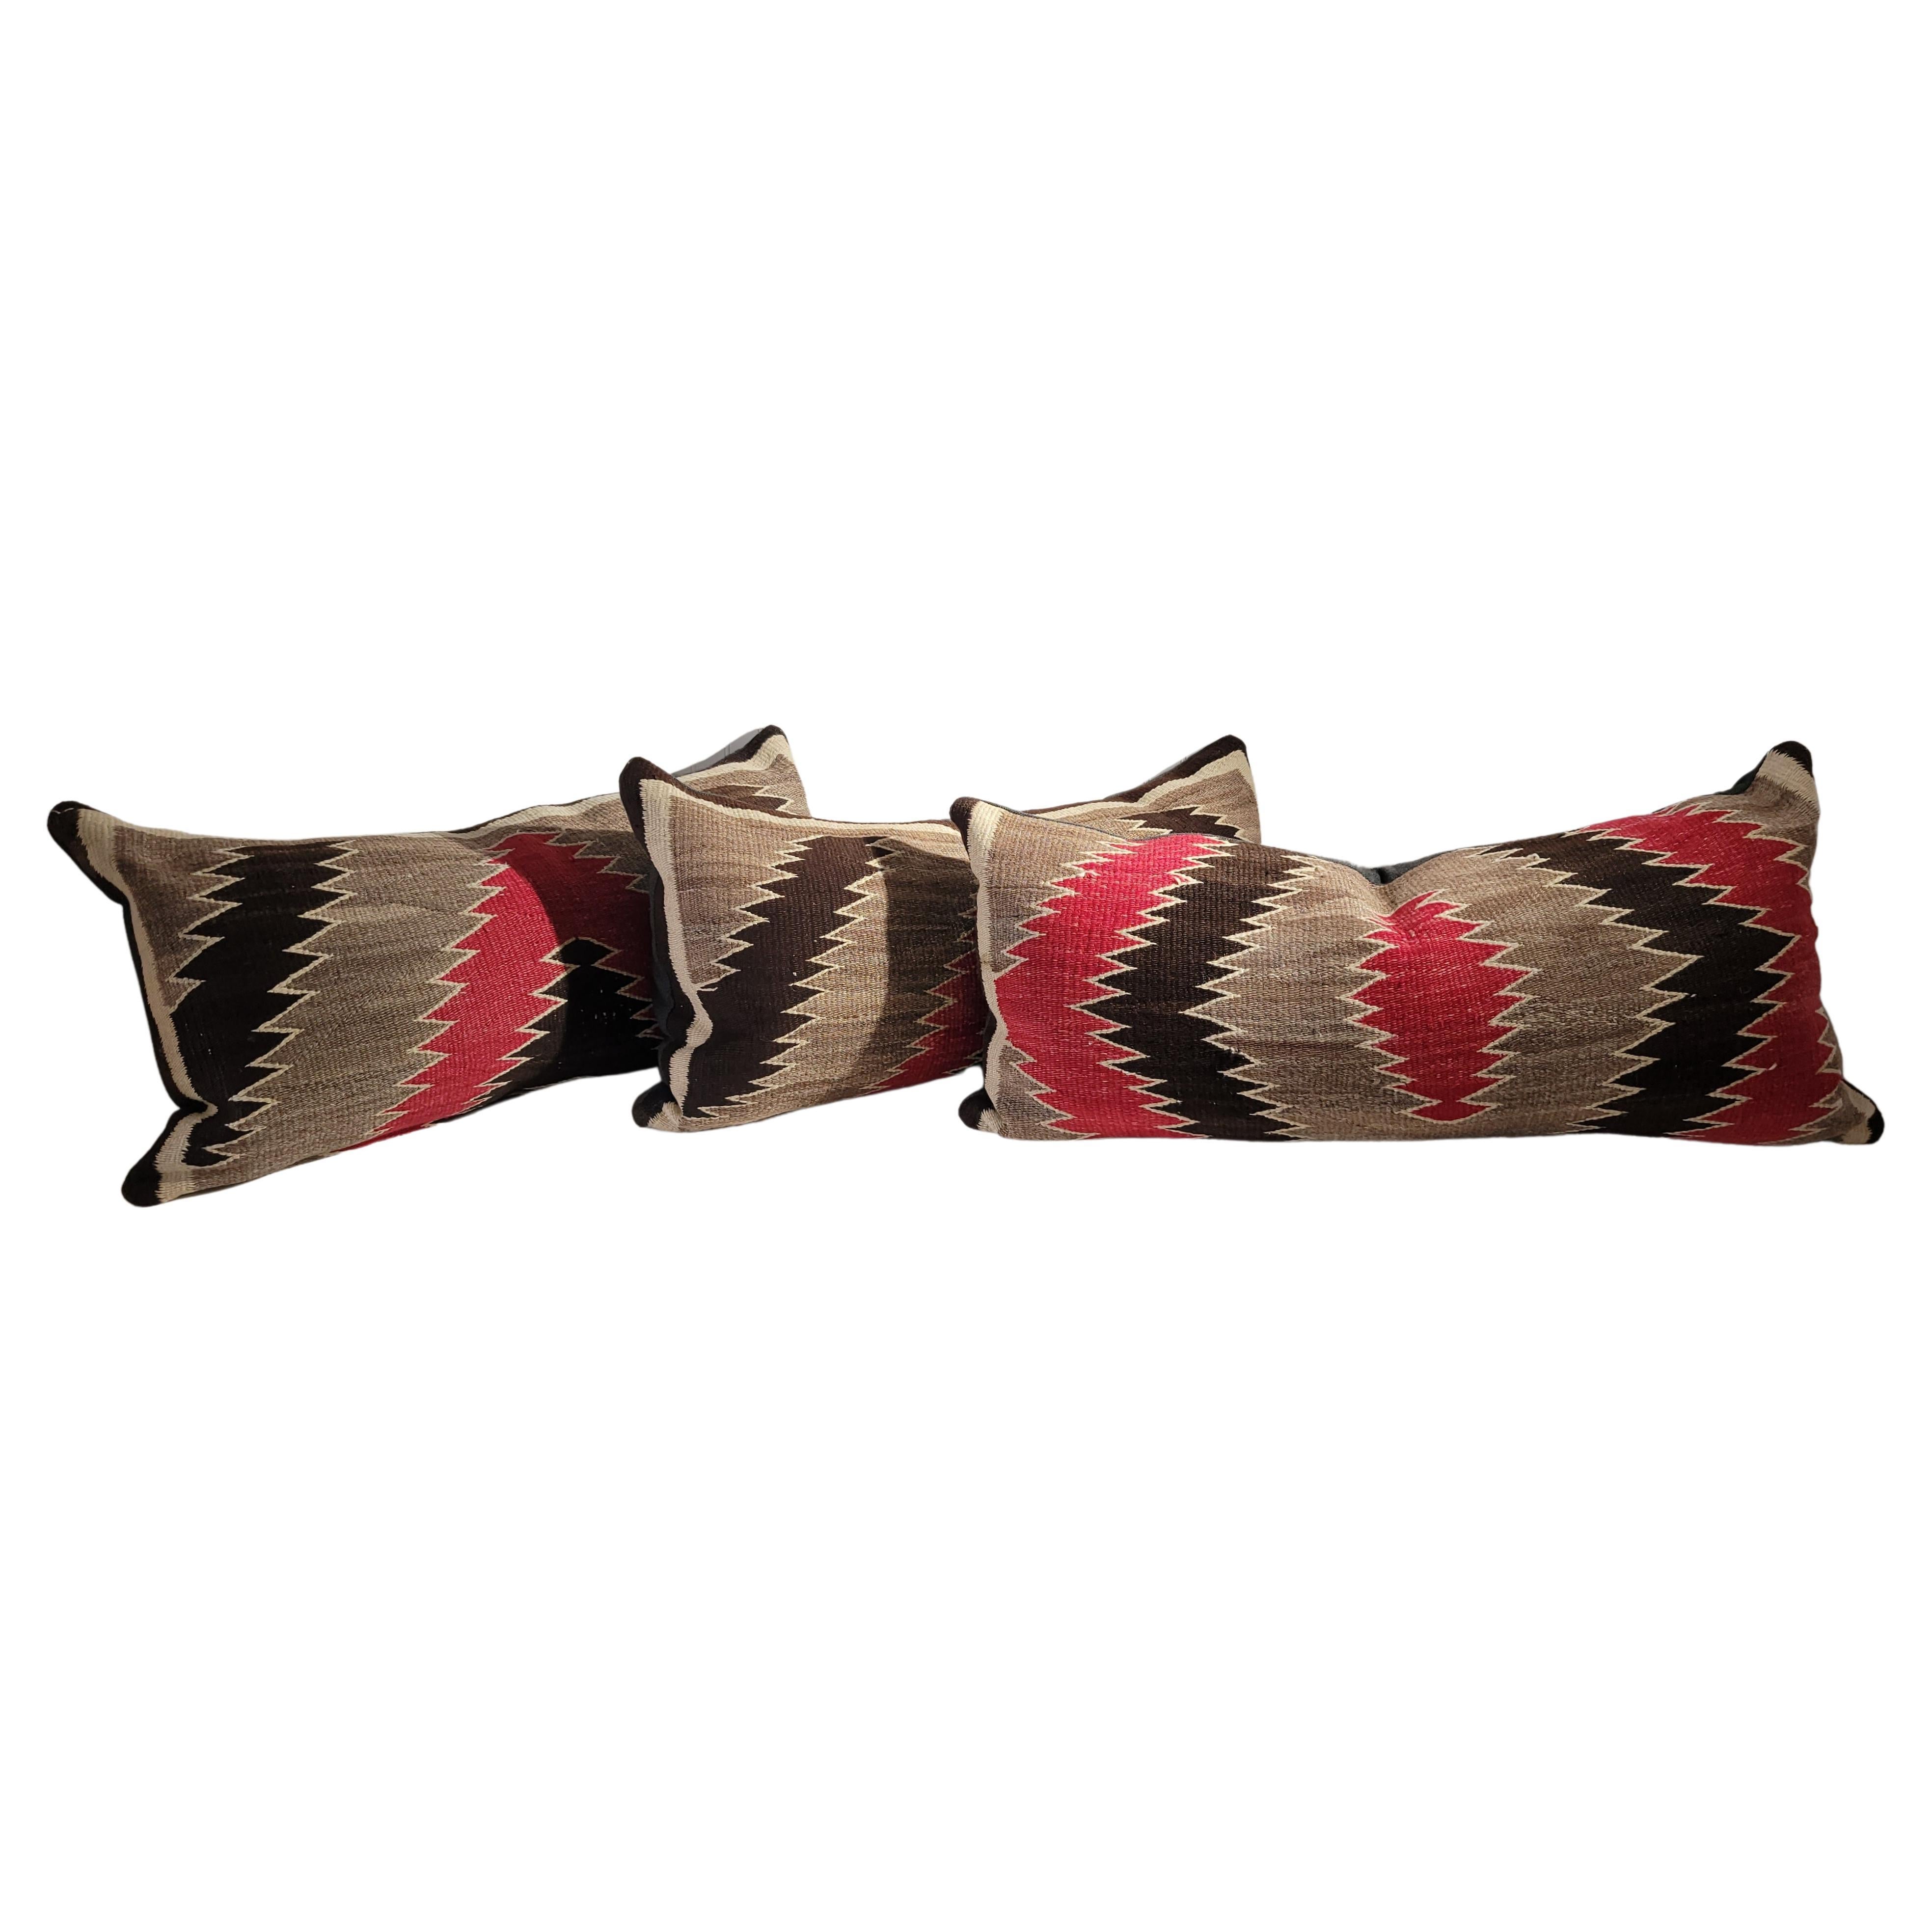 Navajo Indian Wool Bolder pillows with Linen backing. Down and feather custom made inserts. 

This Navajo jigsaw pattern set of three pillows was made from one weaving. Professionally made with the highest quality materials. Adds color and design